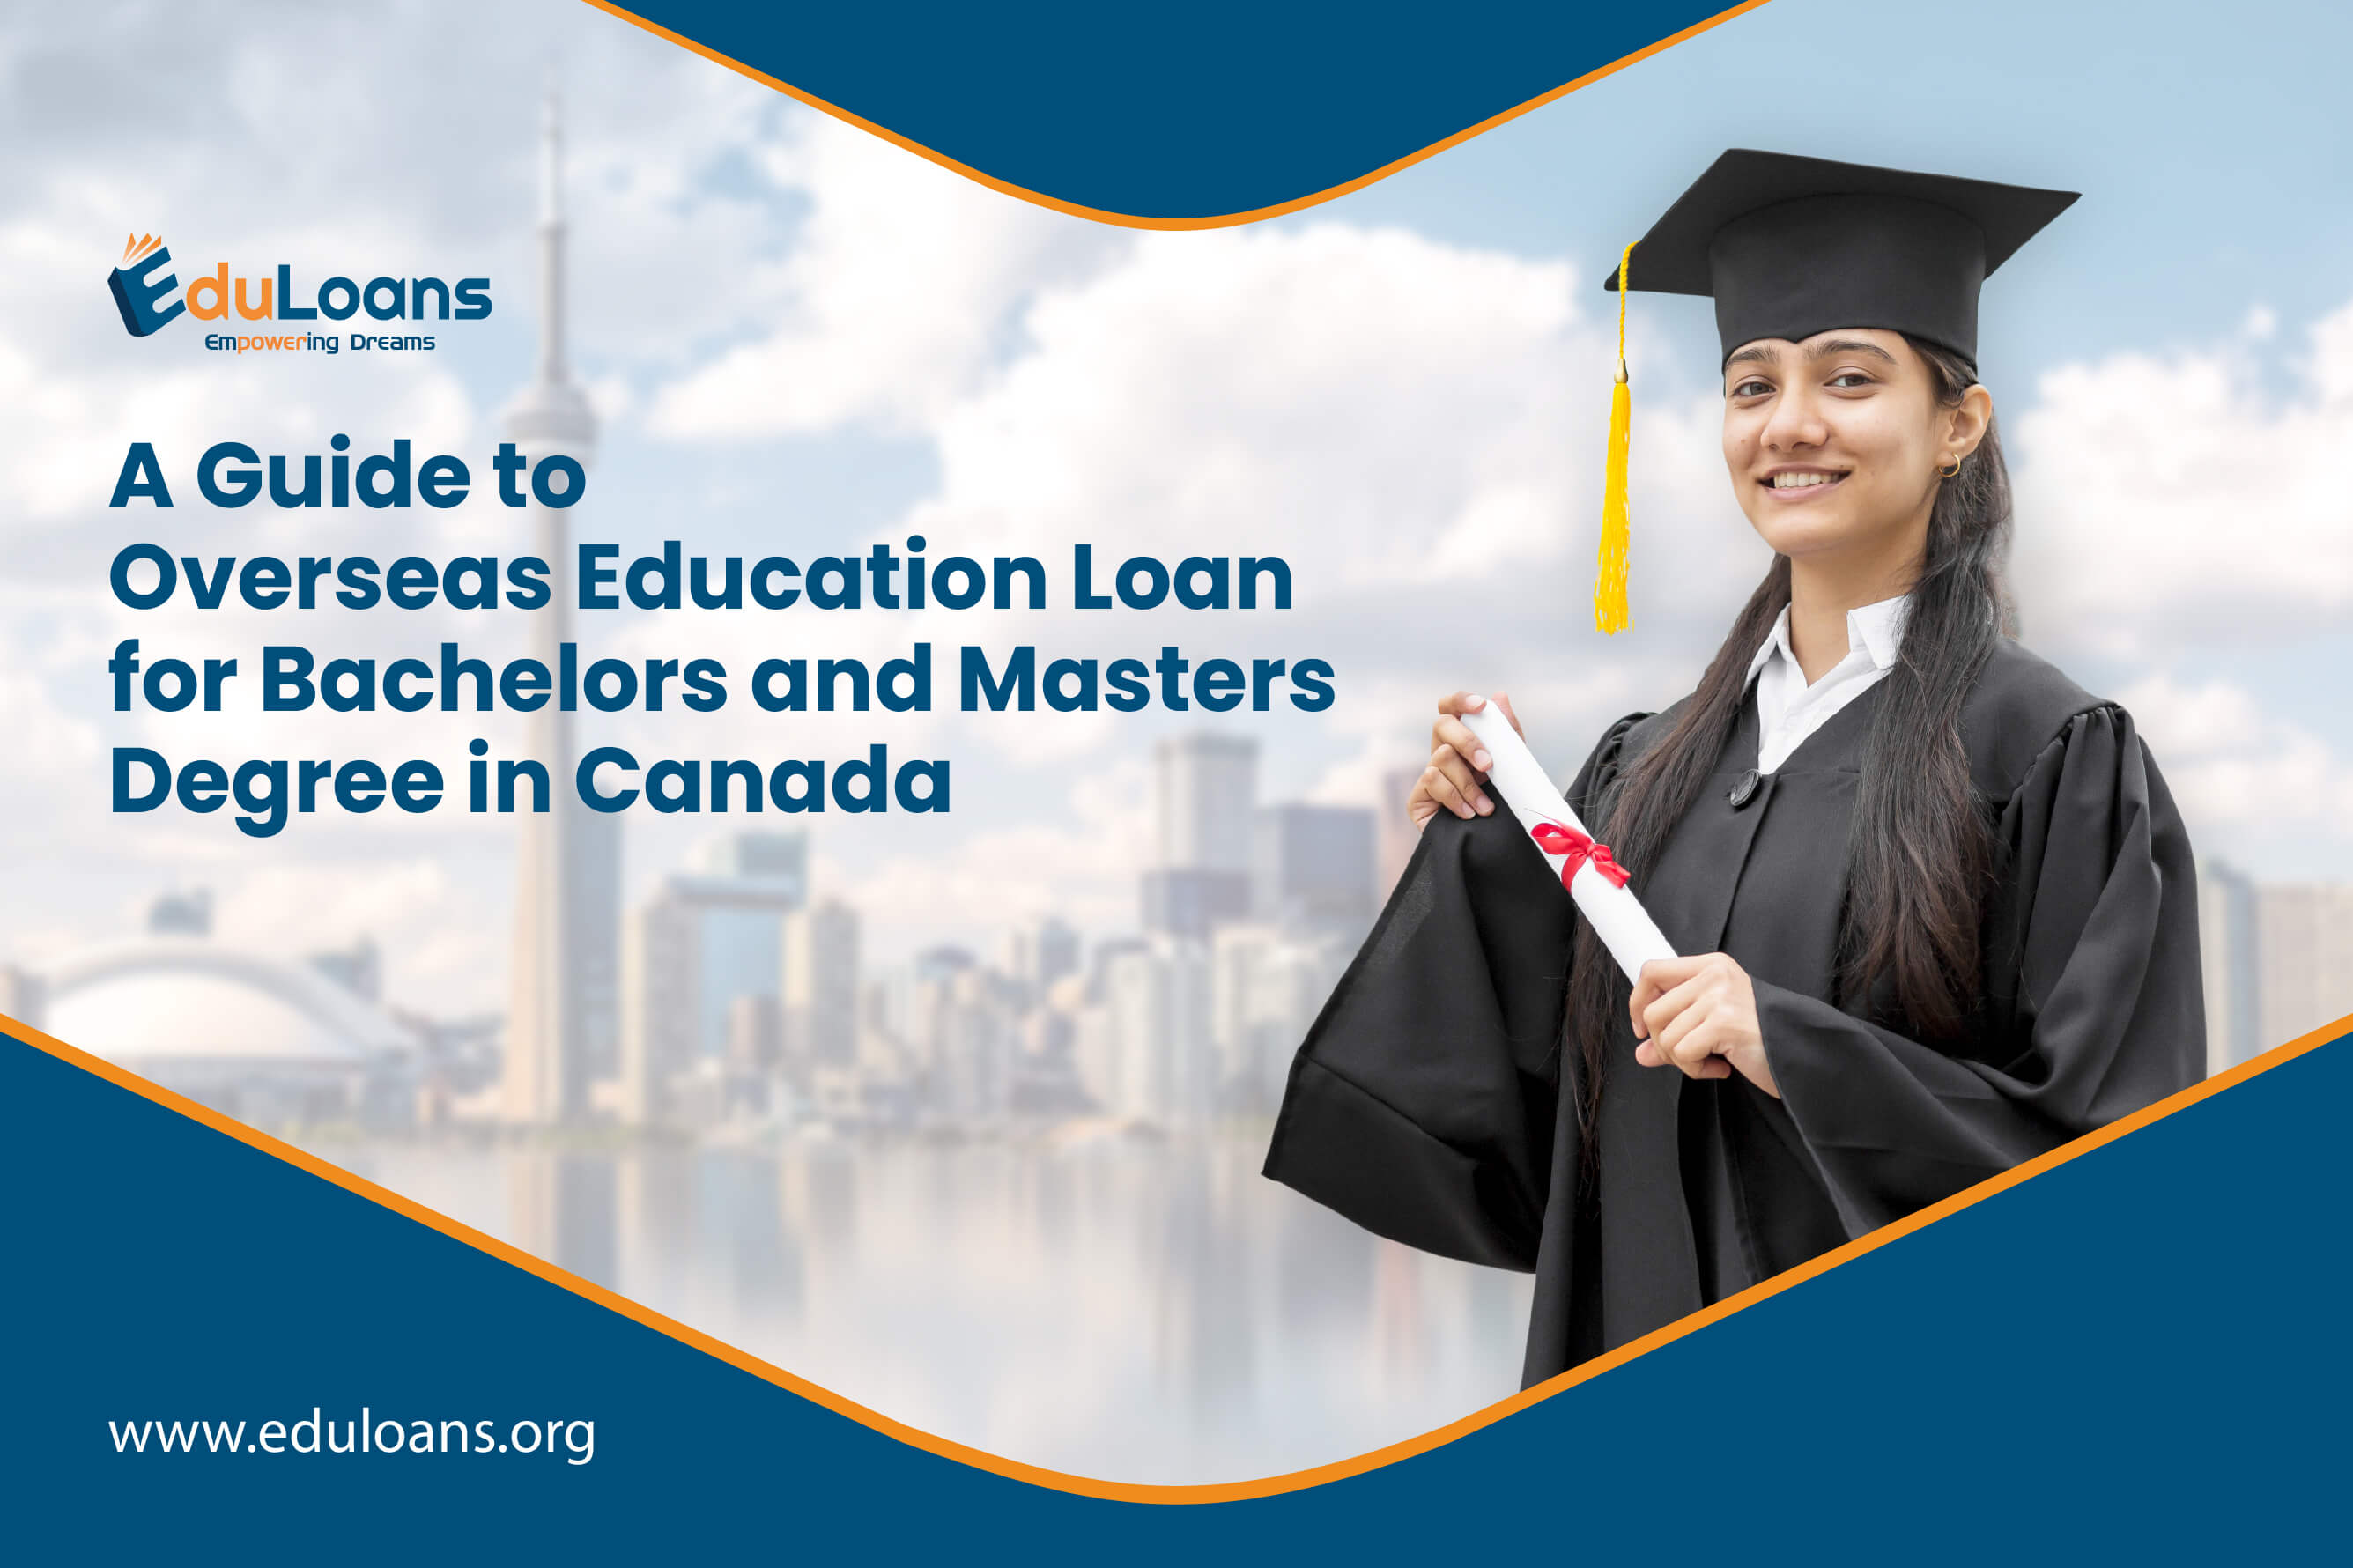 A guide to overseas education loan for Bachelors and Masters degree in Canada